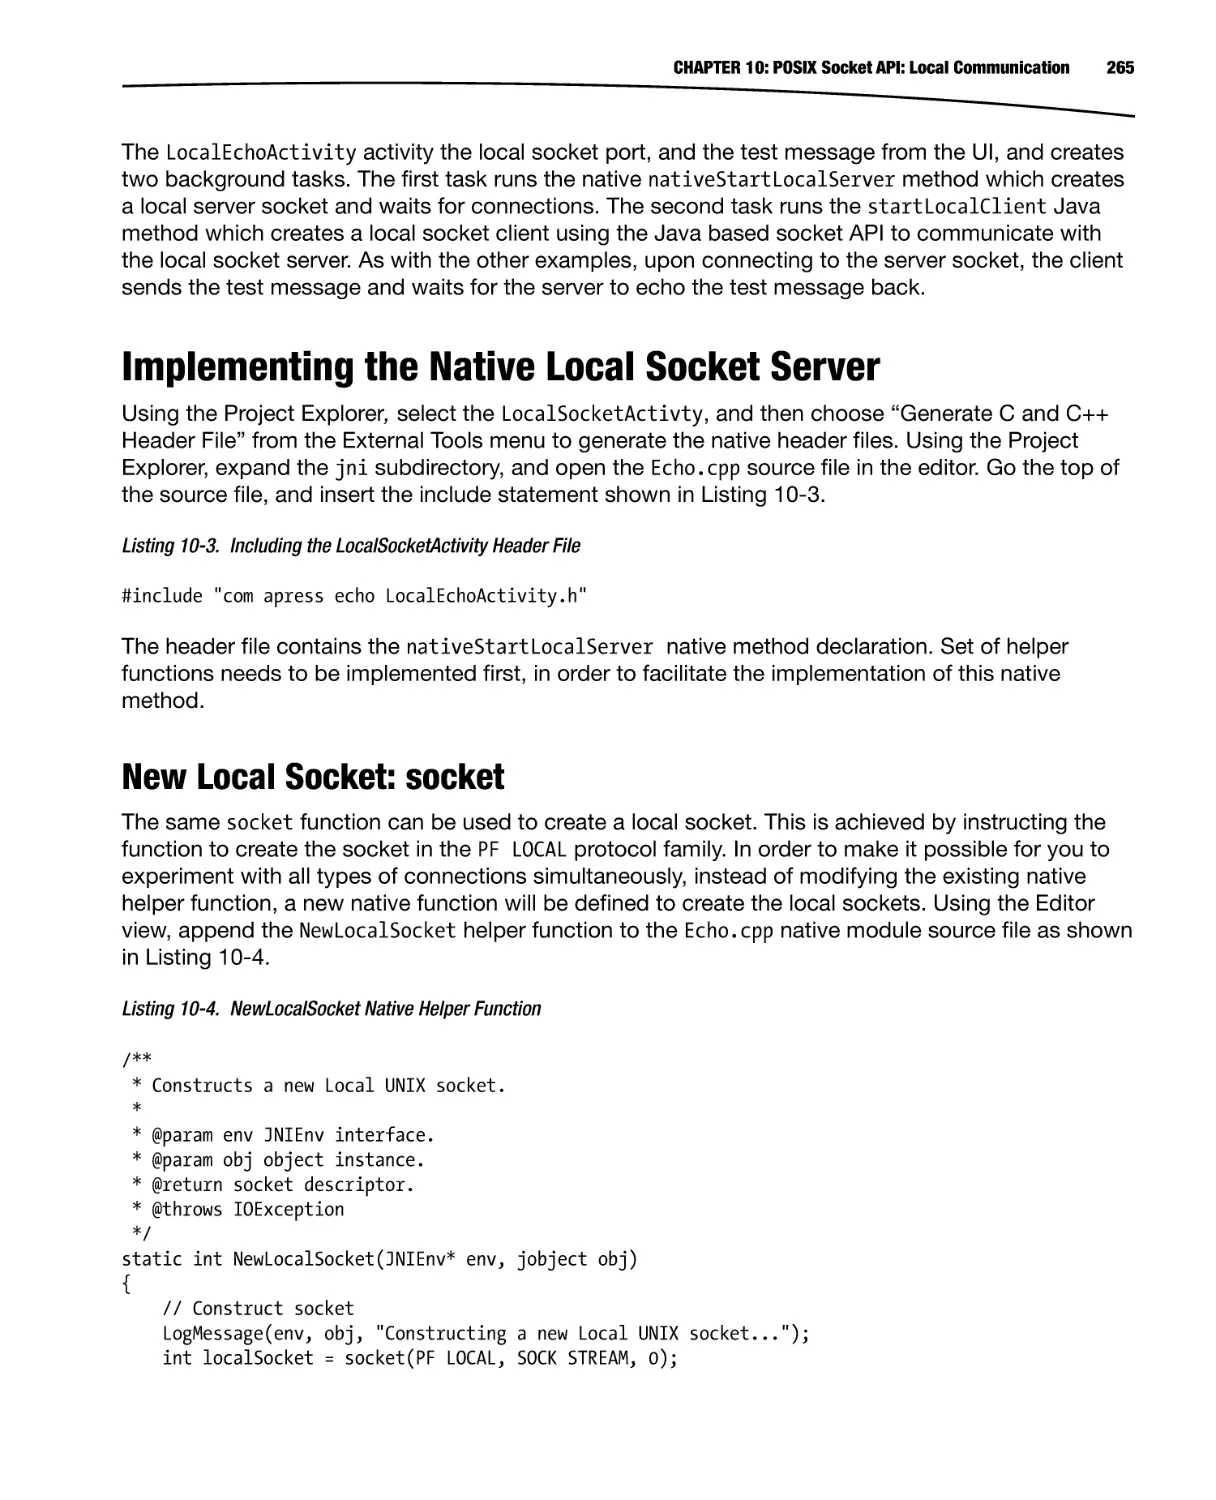 Implementing the Native Local Socket Server
New Local Socket